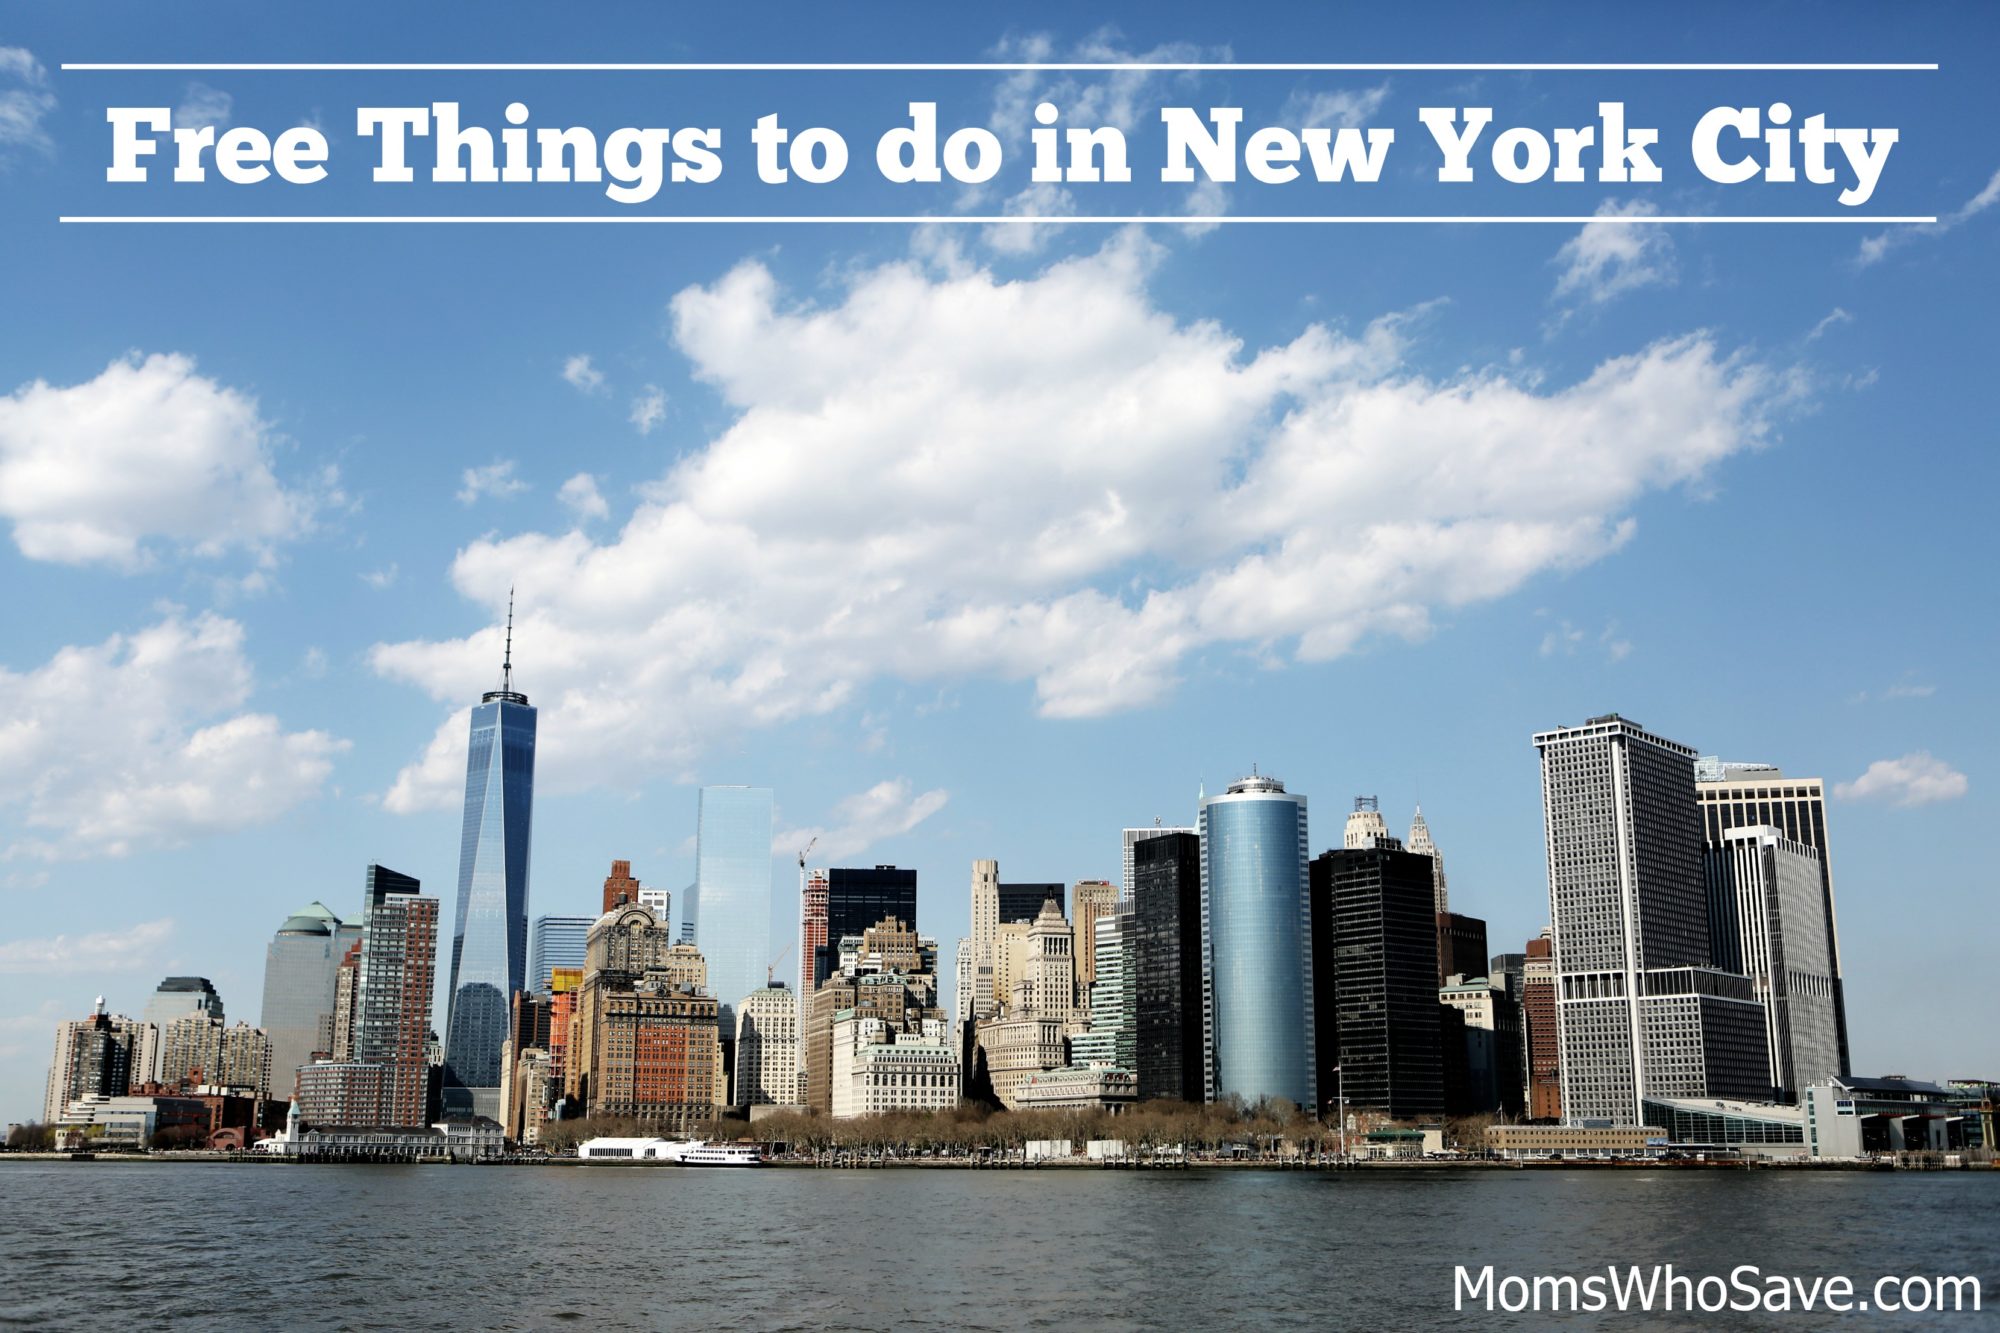 Free Things to do in New York City